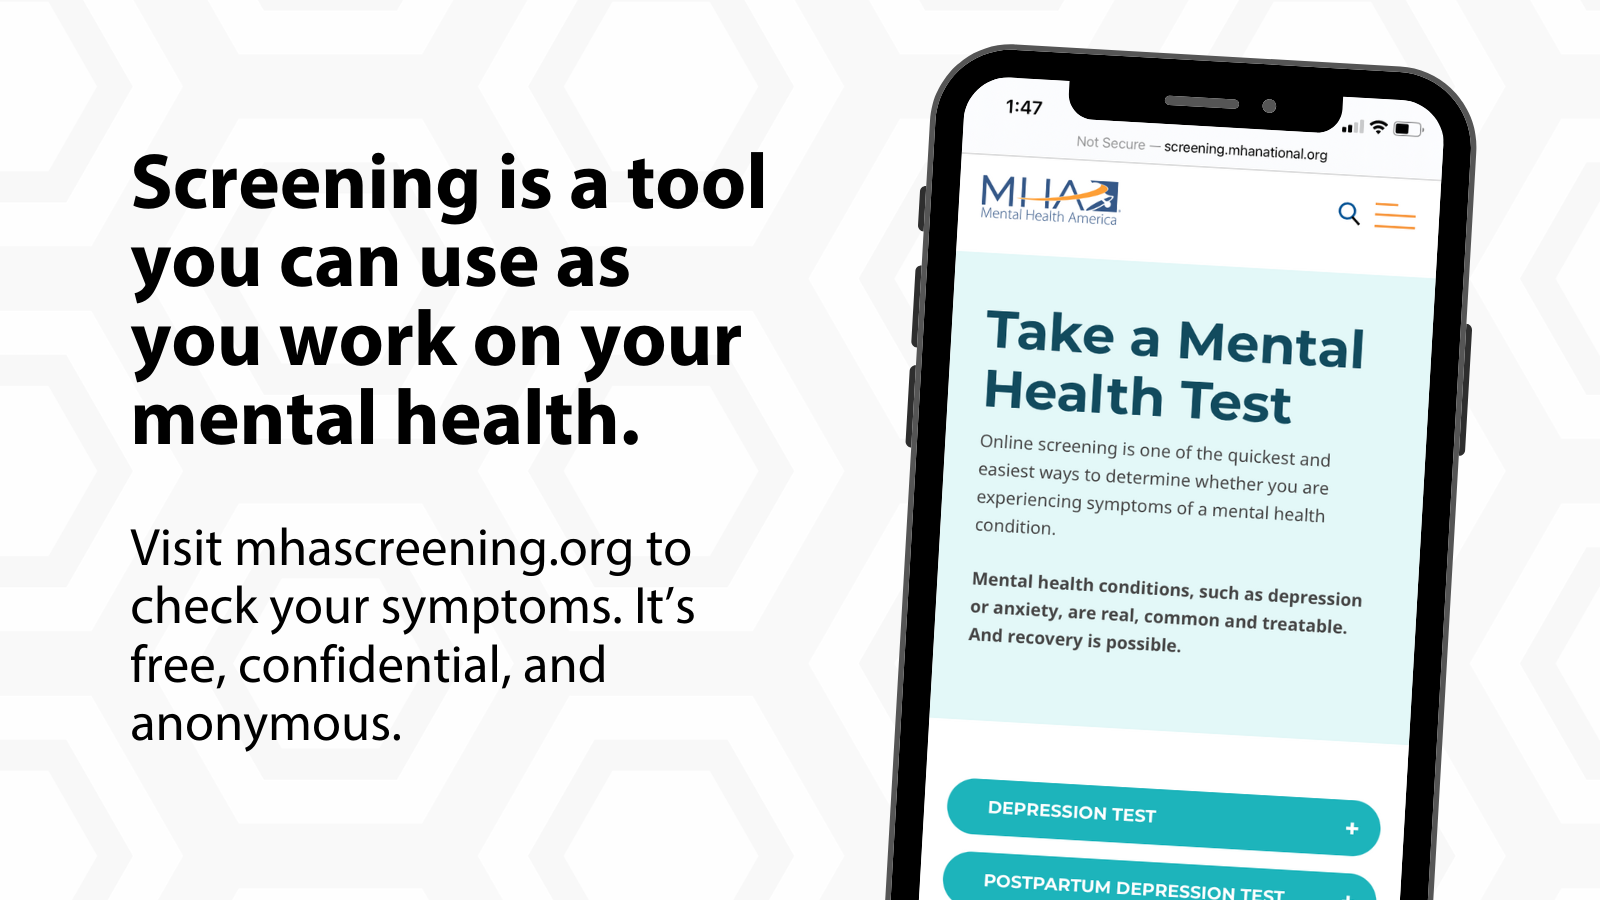 Screening is a tool you can use as you work on your mental health. Visit mhascreening.org to check your symptoms. It's free, confidential, and anonymous.